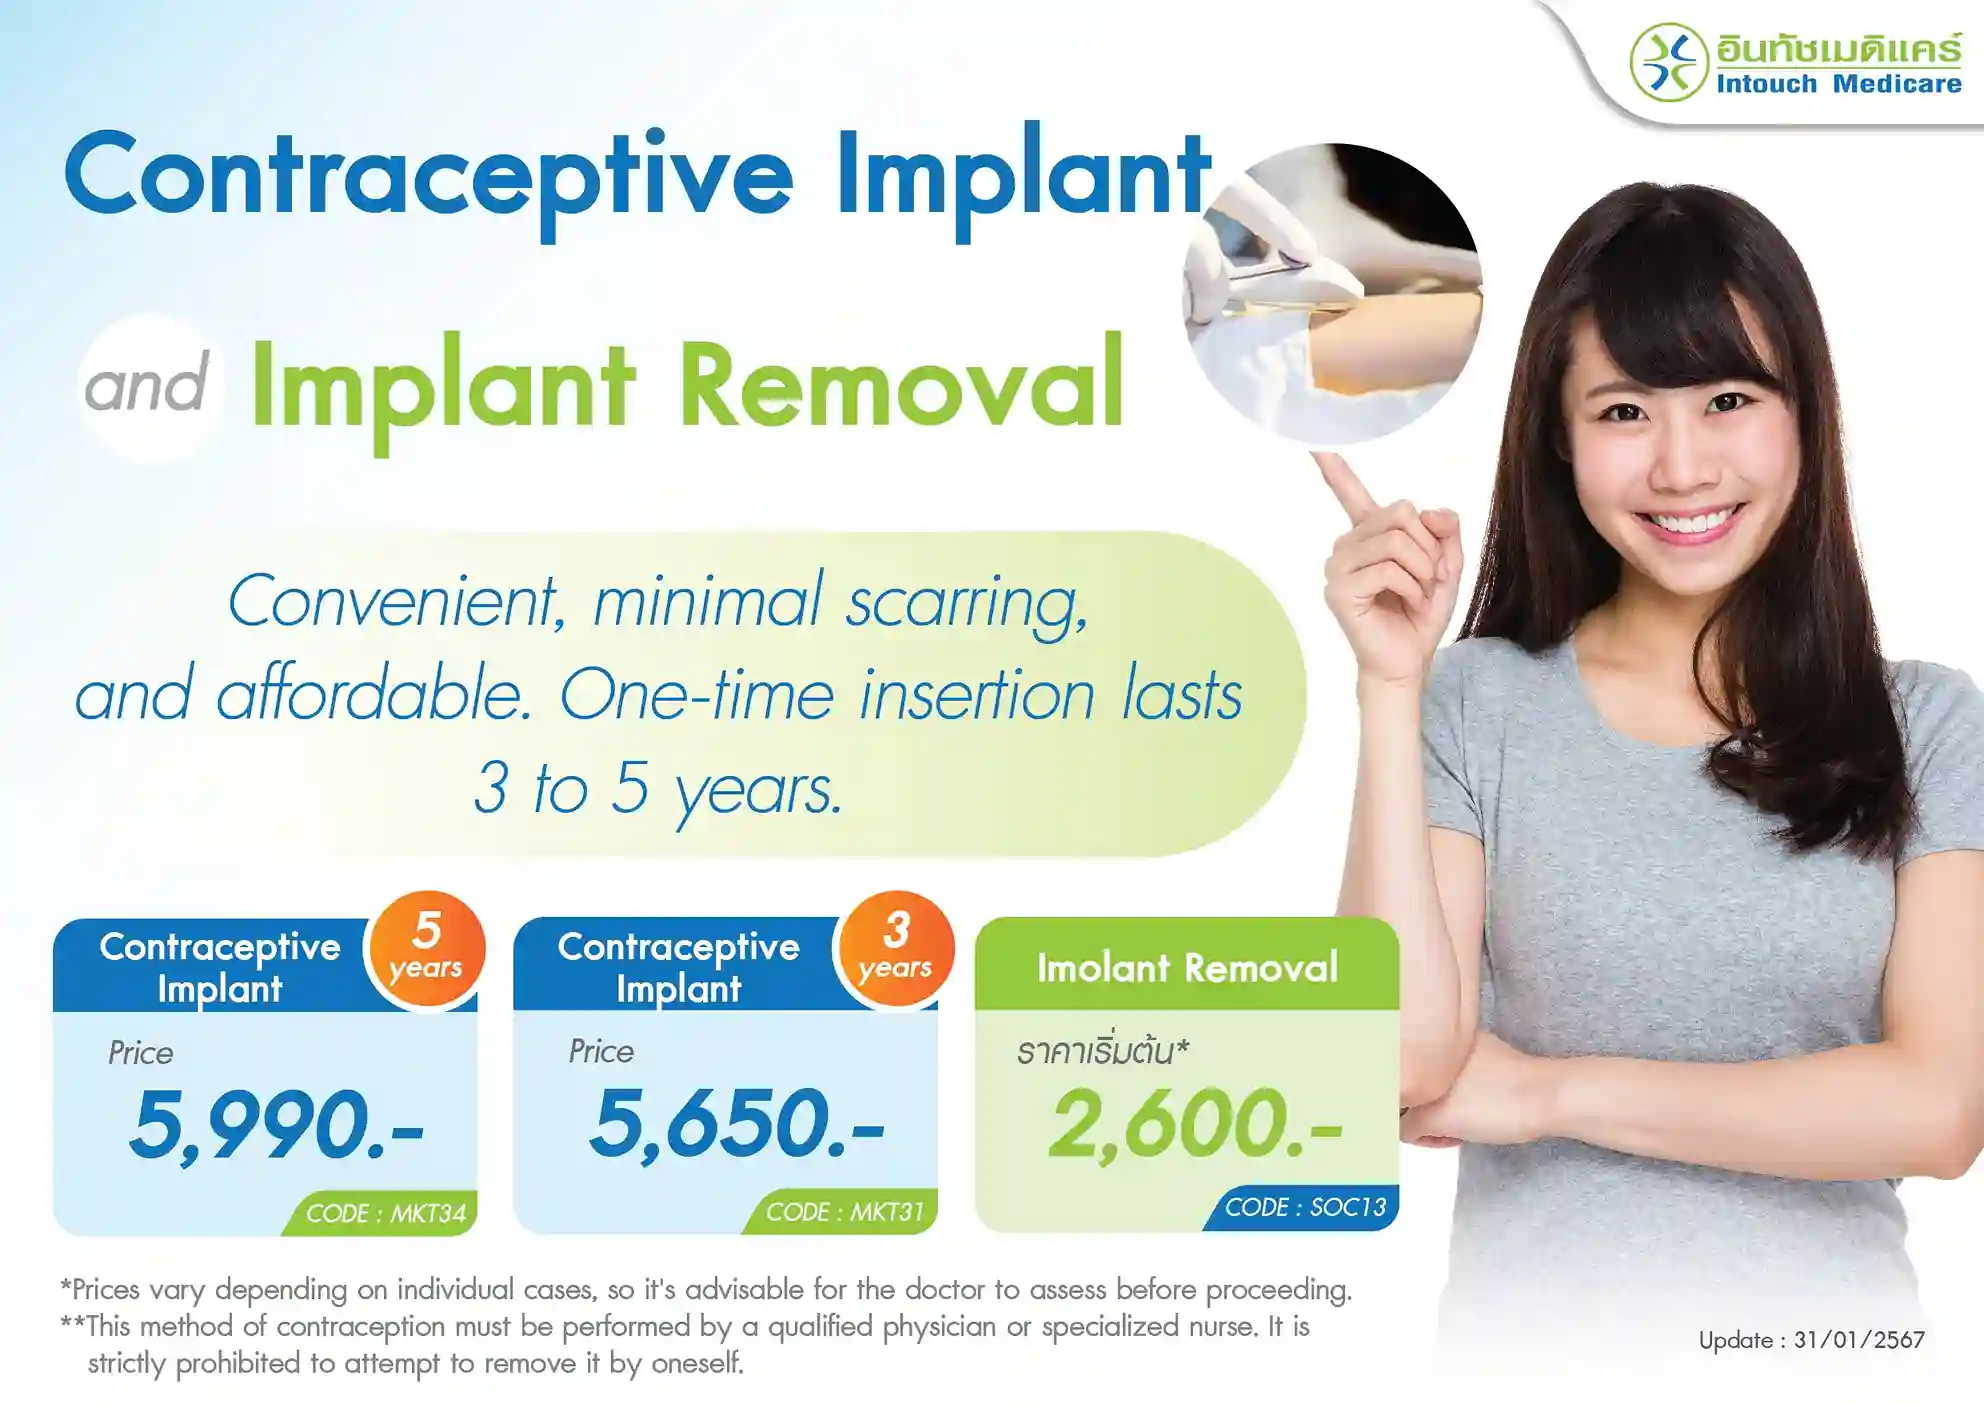 Contraceptive Implant and Implant Removal price